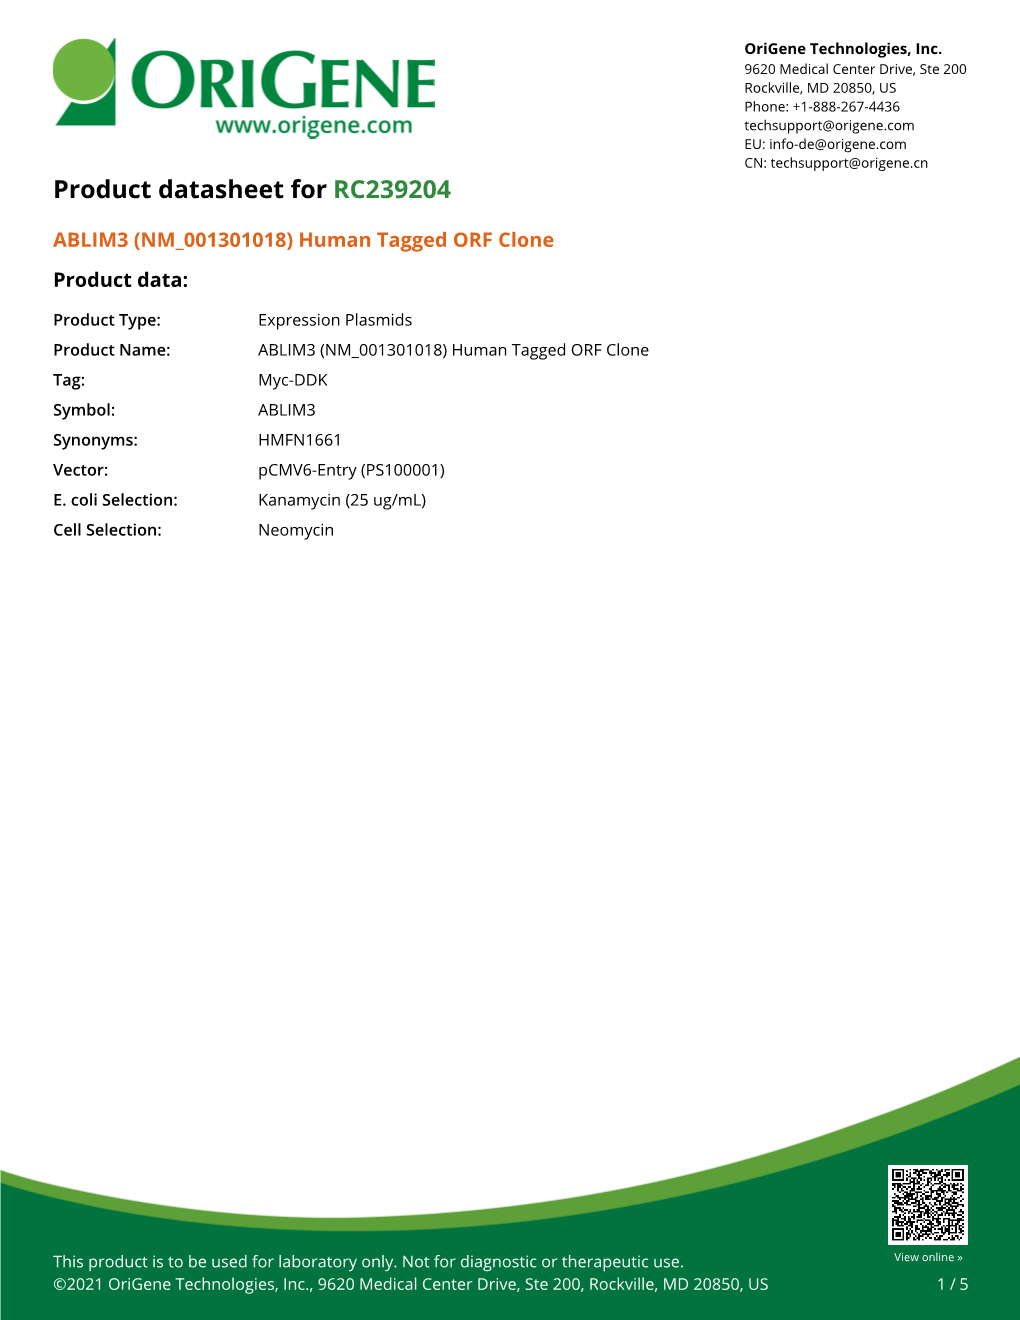 ABLIM3 (NM 001301018) Human Tagged ORF Clone Product Data